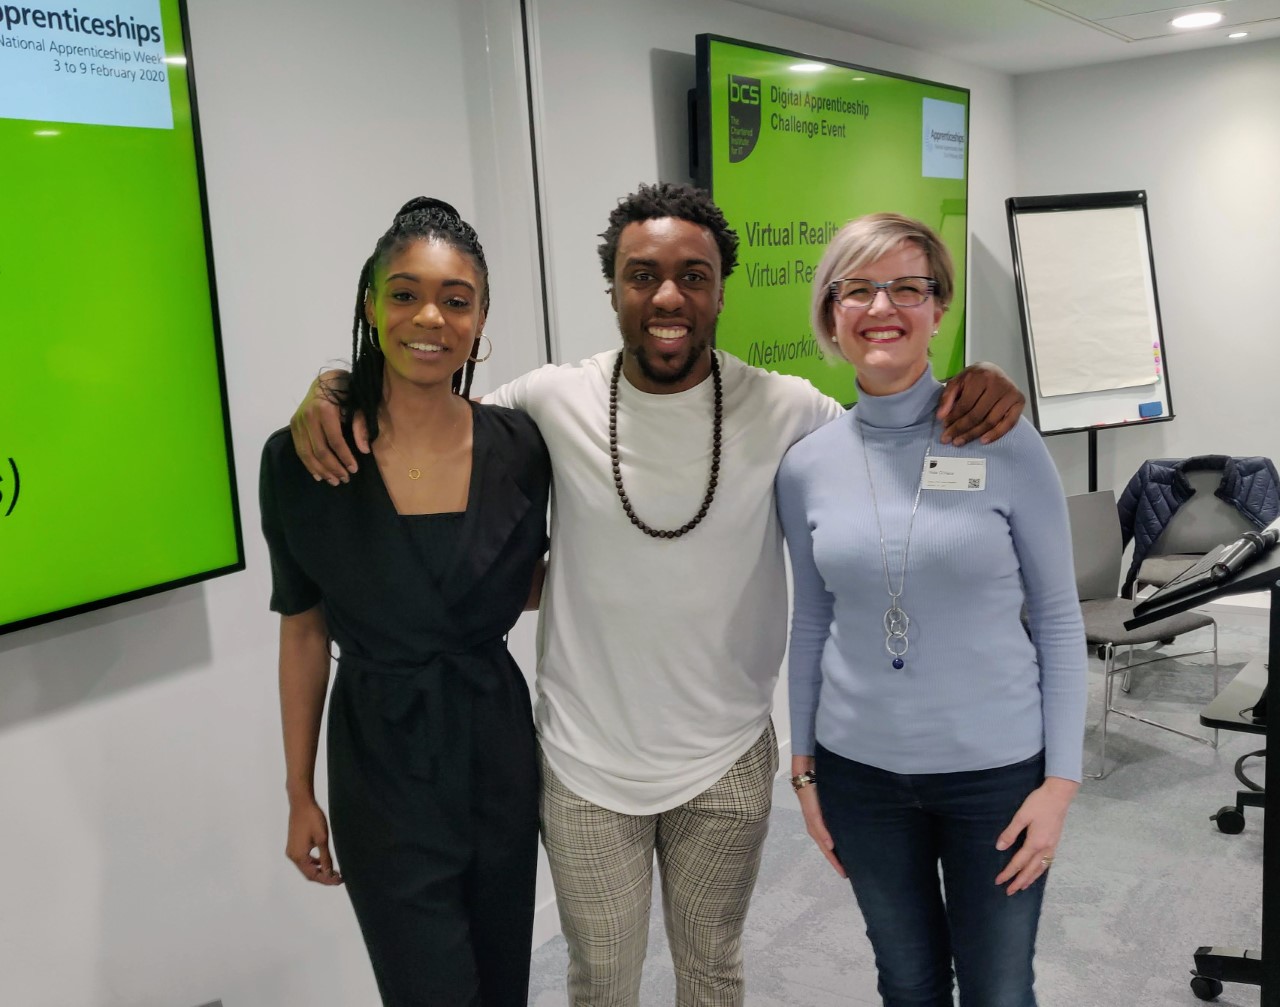 Apprentices get connected with using social media for business